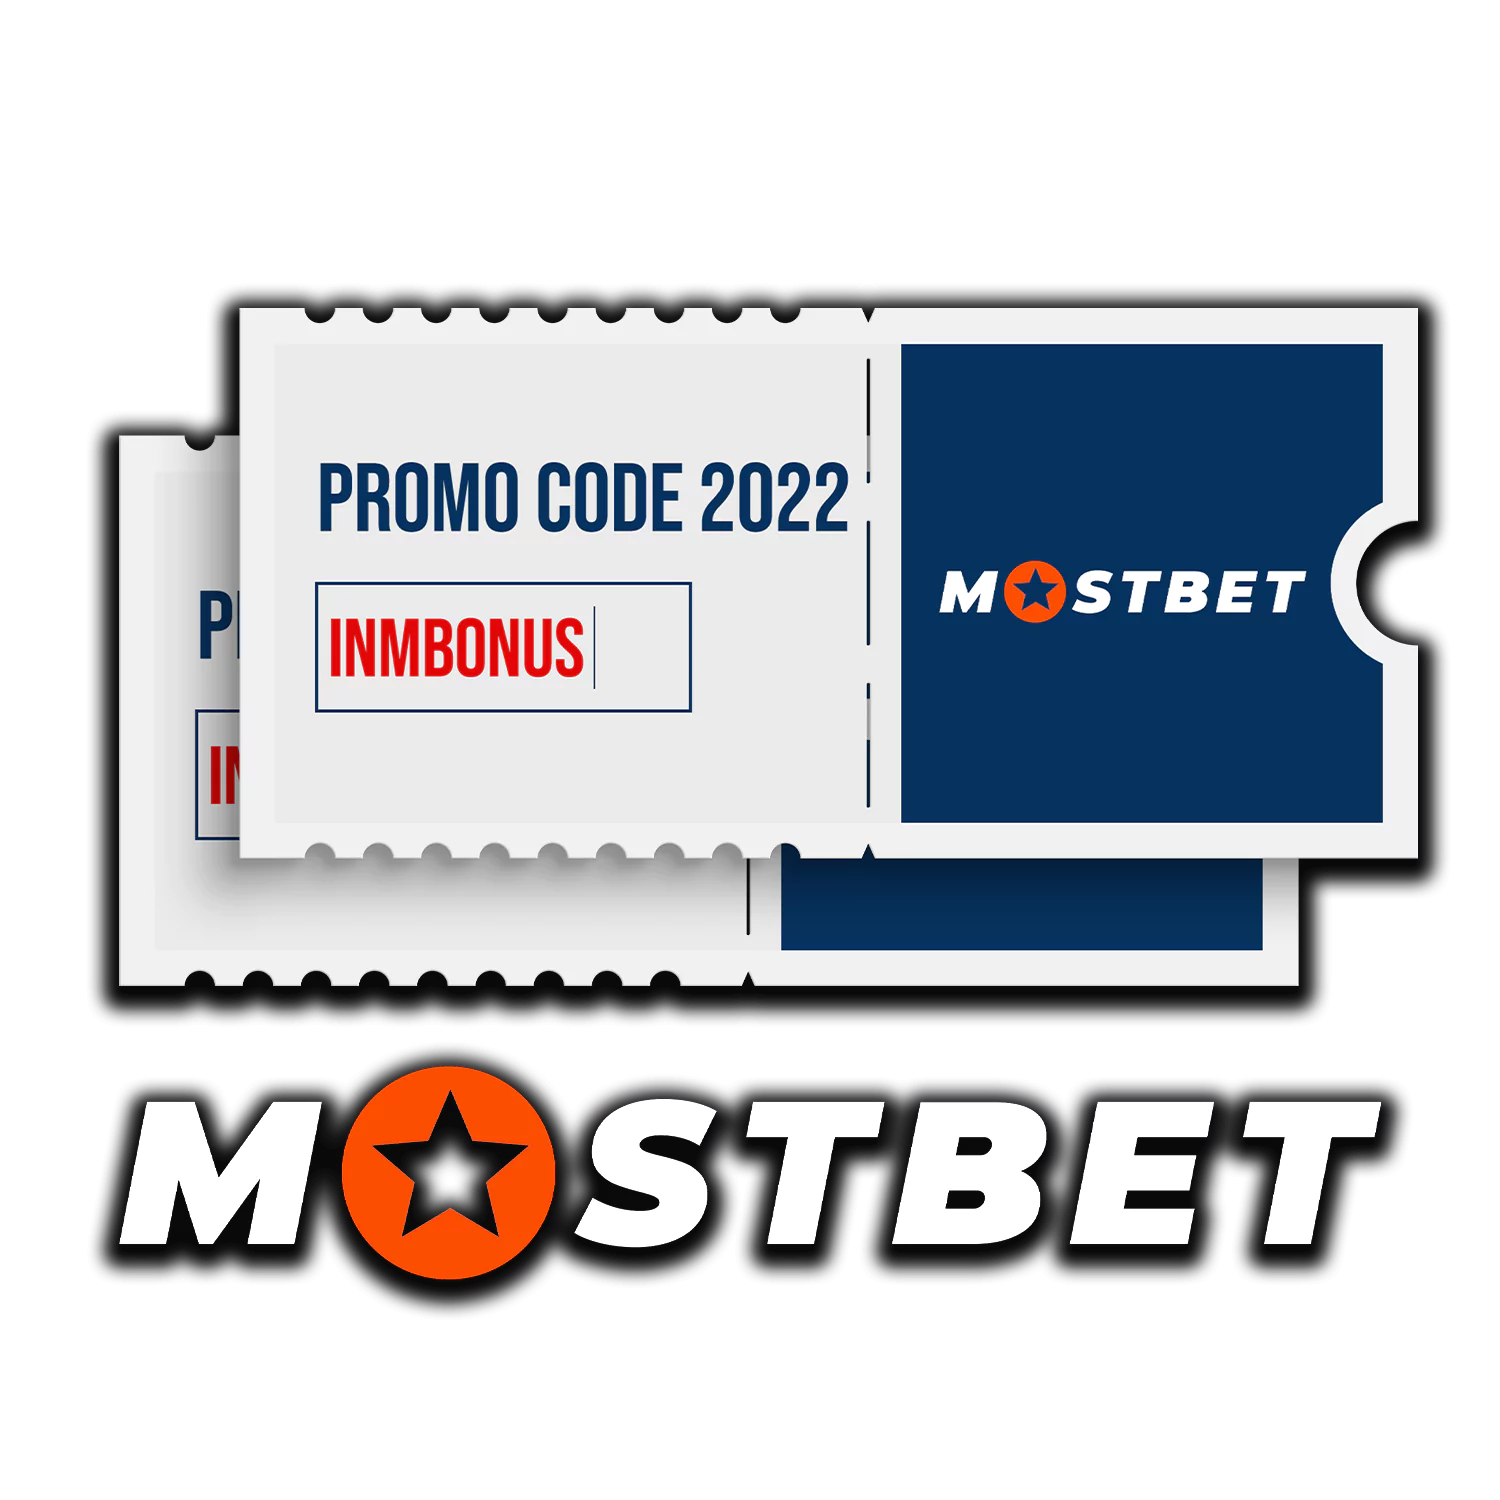 Sign up and get an exclusive promo code for sports betting and casino at Mostbet.